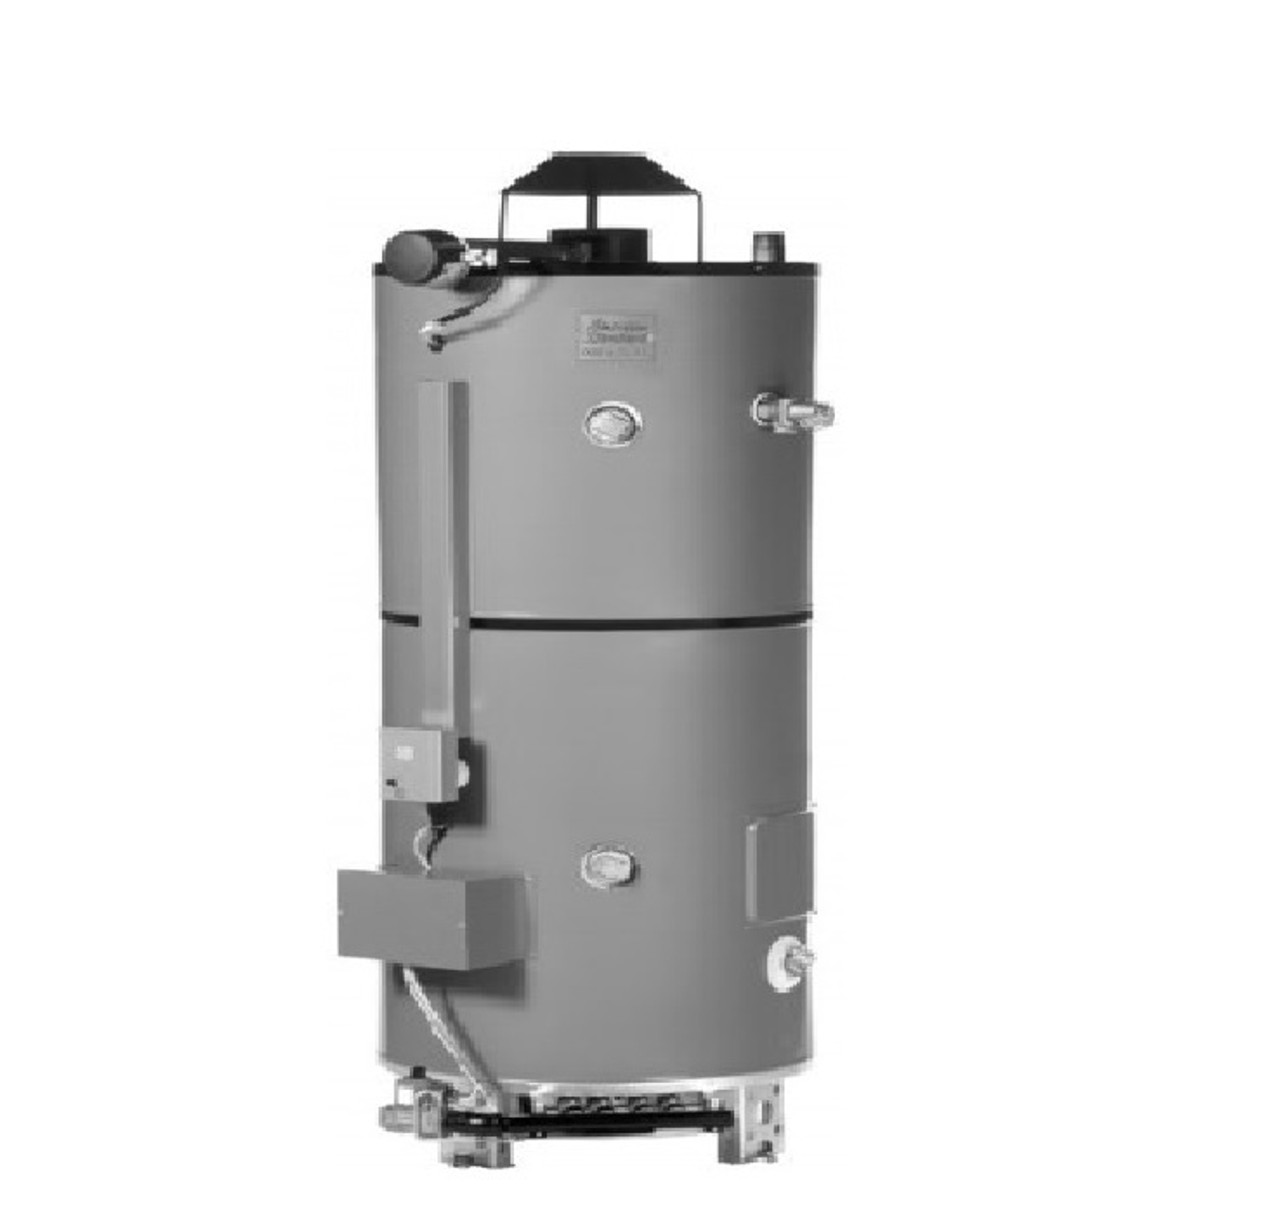 American Standard D80-180 AS Water Heater - 80 Gallon Commercial